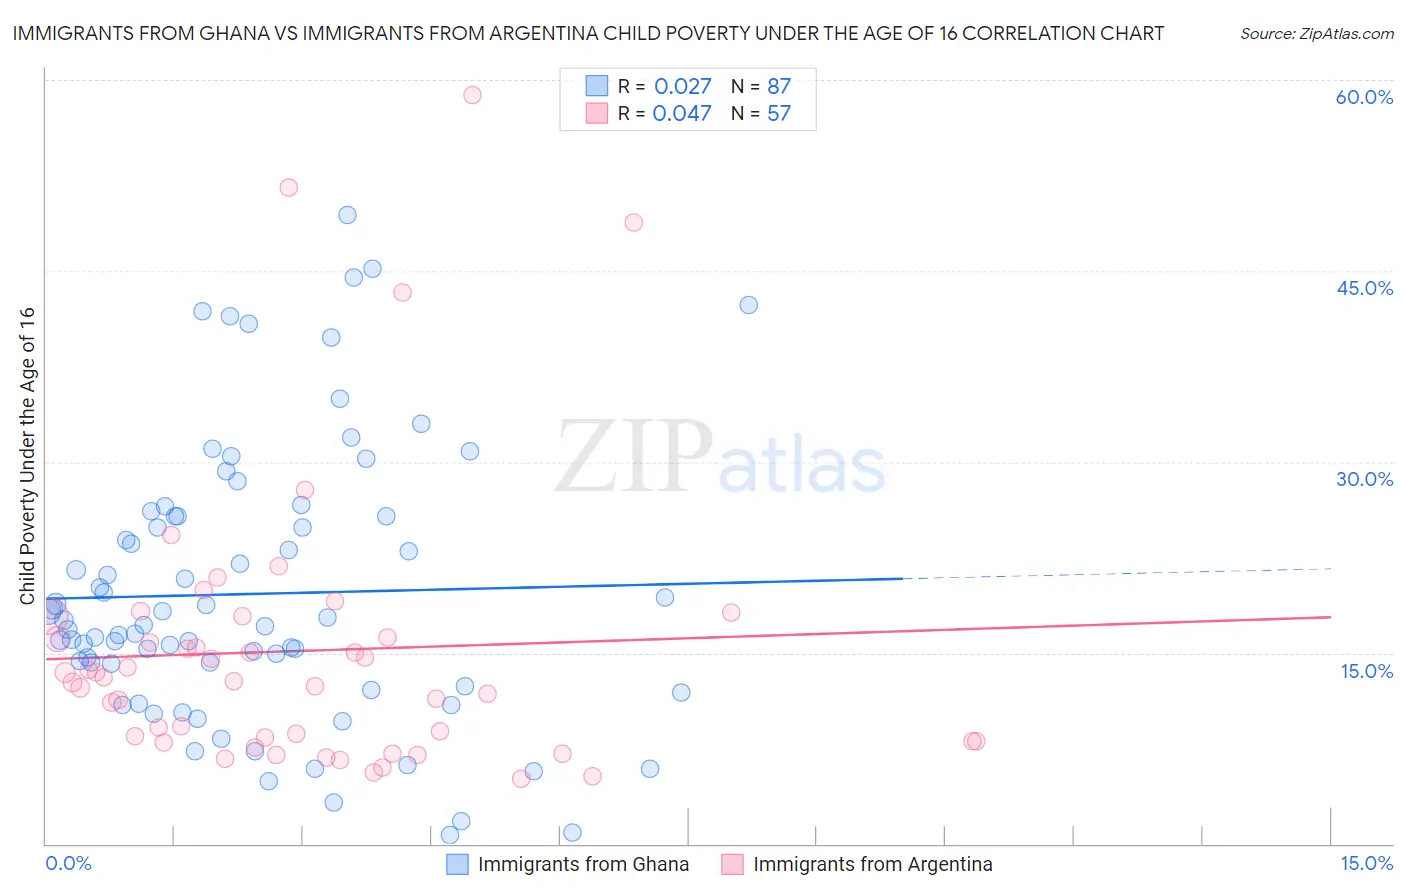 Immigrants from Ghana vs Immigrants from Argentina Child Poverty Under the Age of 16